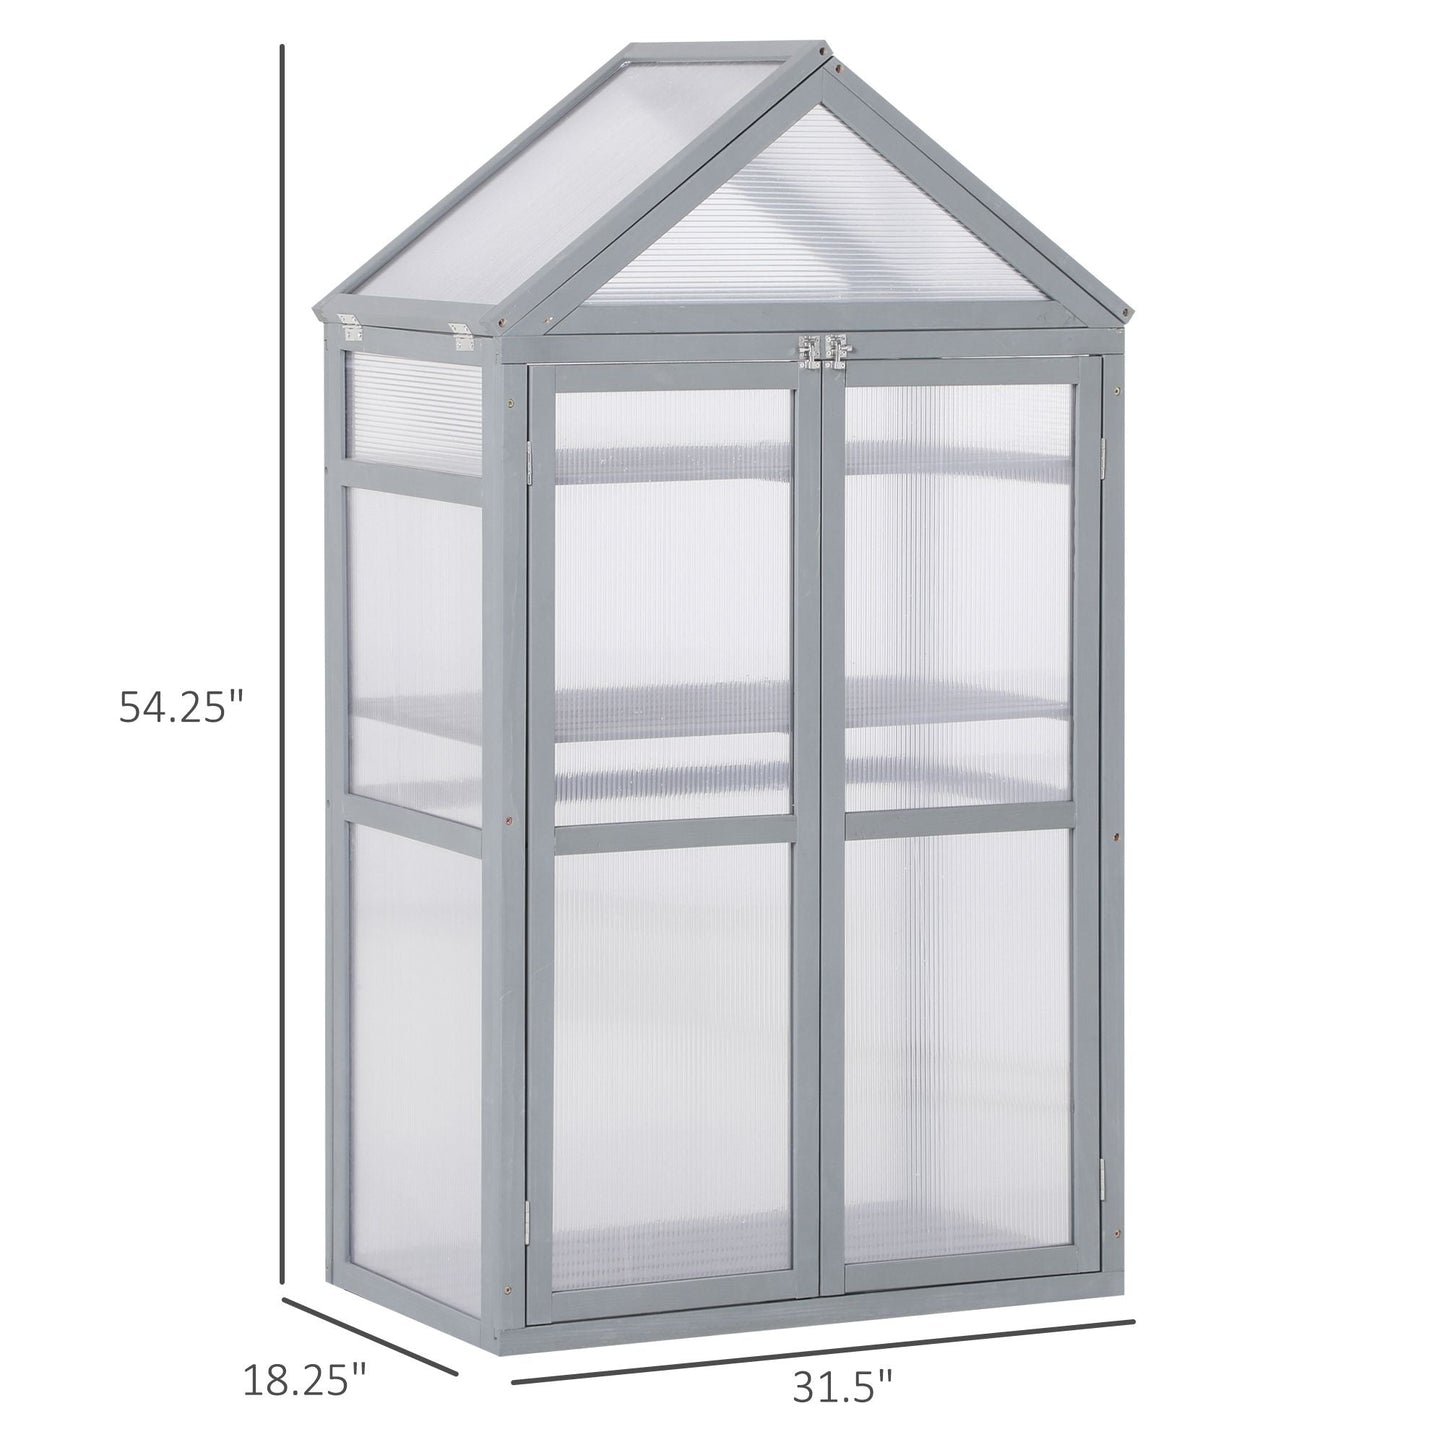 -Outsunny 32" x 19" x 54" Garden Wooden Cold Frame Greenhouse Flower Planter Protection w/ Adjustable Shelves, Double Doors - Grey - Outdoor Style Company